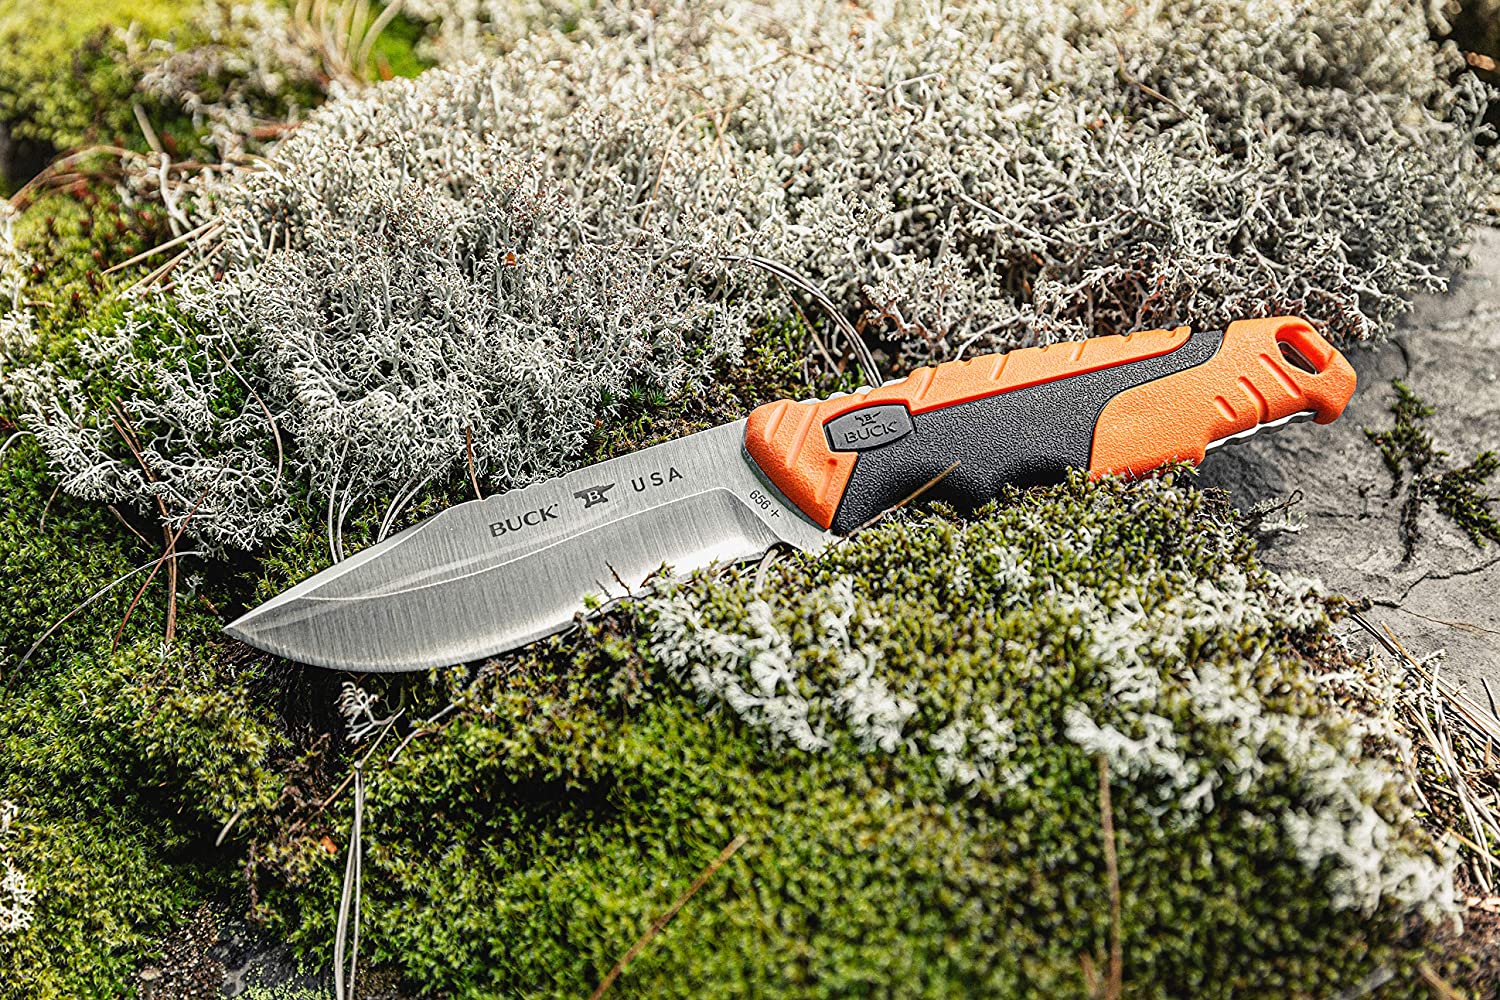 Buck 656 Pursuit Large Knife with Sheath - Buck® Knives OFFICIAL SITE